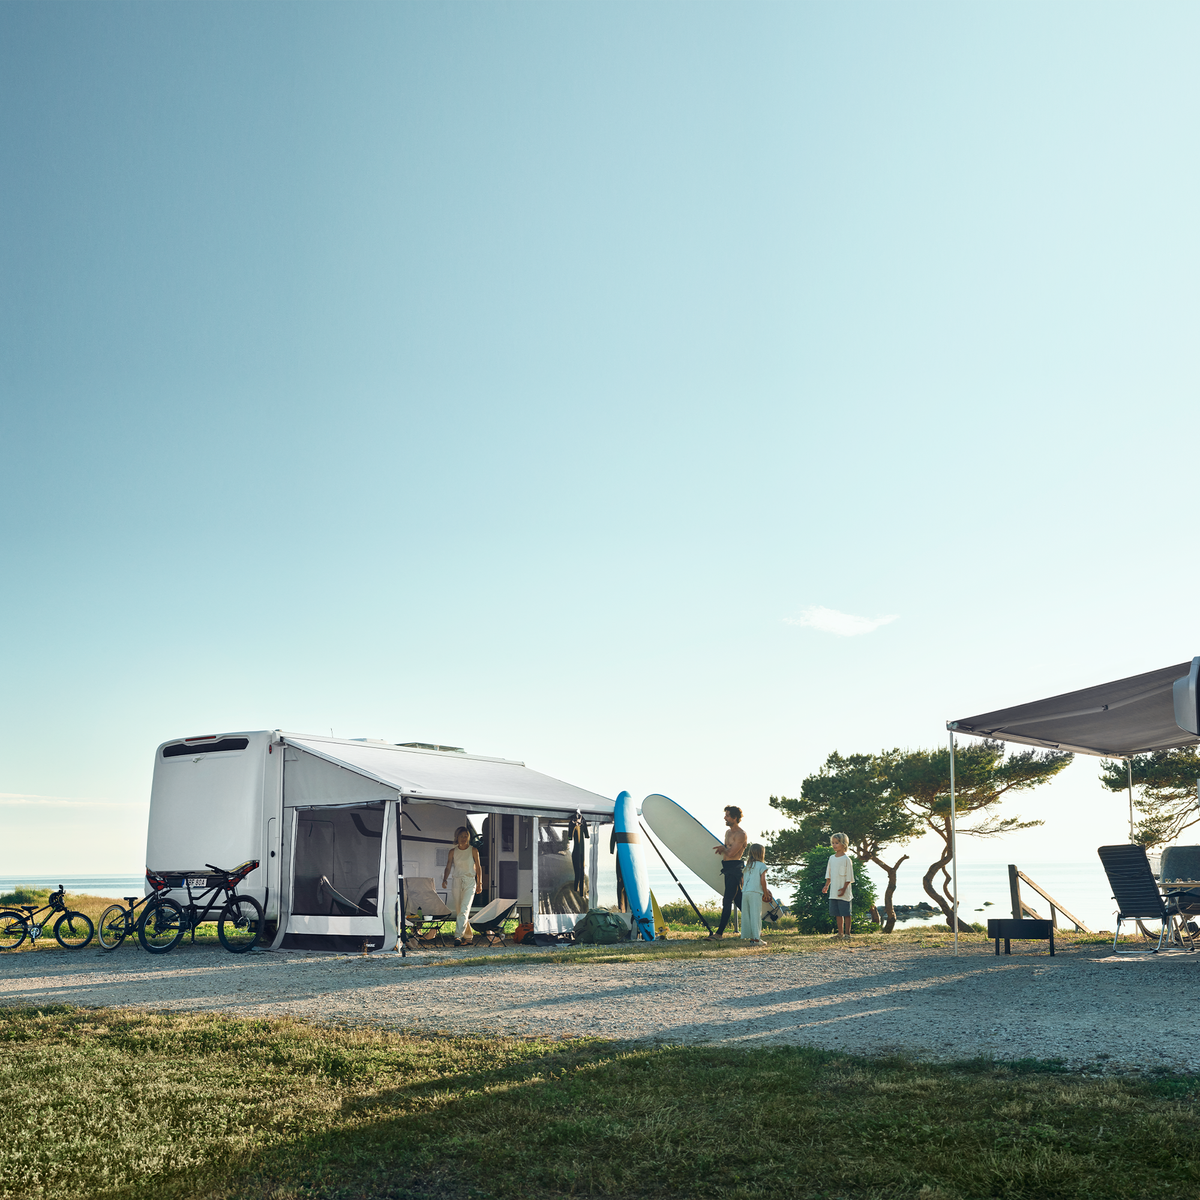 Two motorhomes parked in the countryside have a Thule Residence G3 rv awning tent.